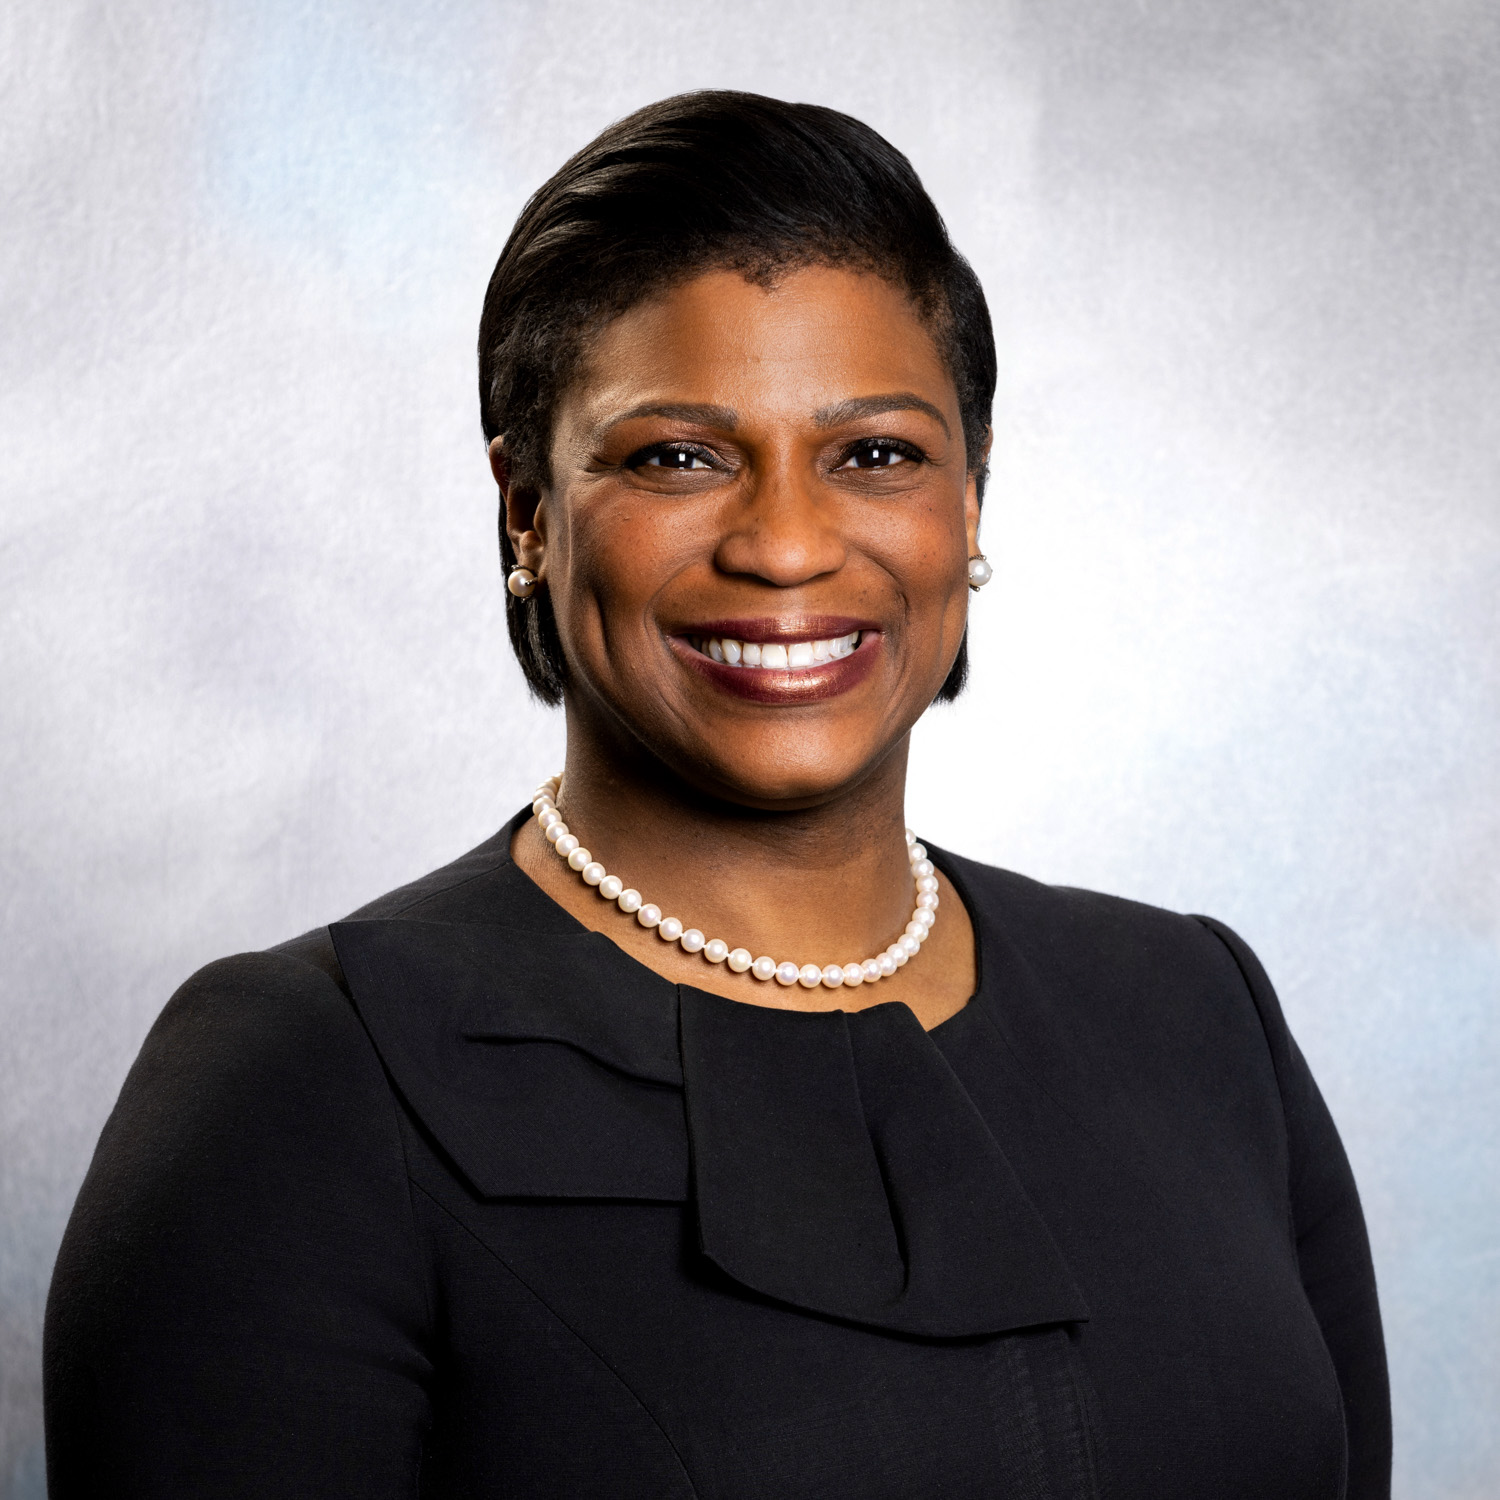 Rian M. Hasson Charles, MD, MPH, FACS, has a first-of-its-kind role at Brigham Women’s Hospital that will focus on health equity.